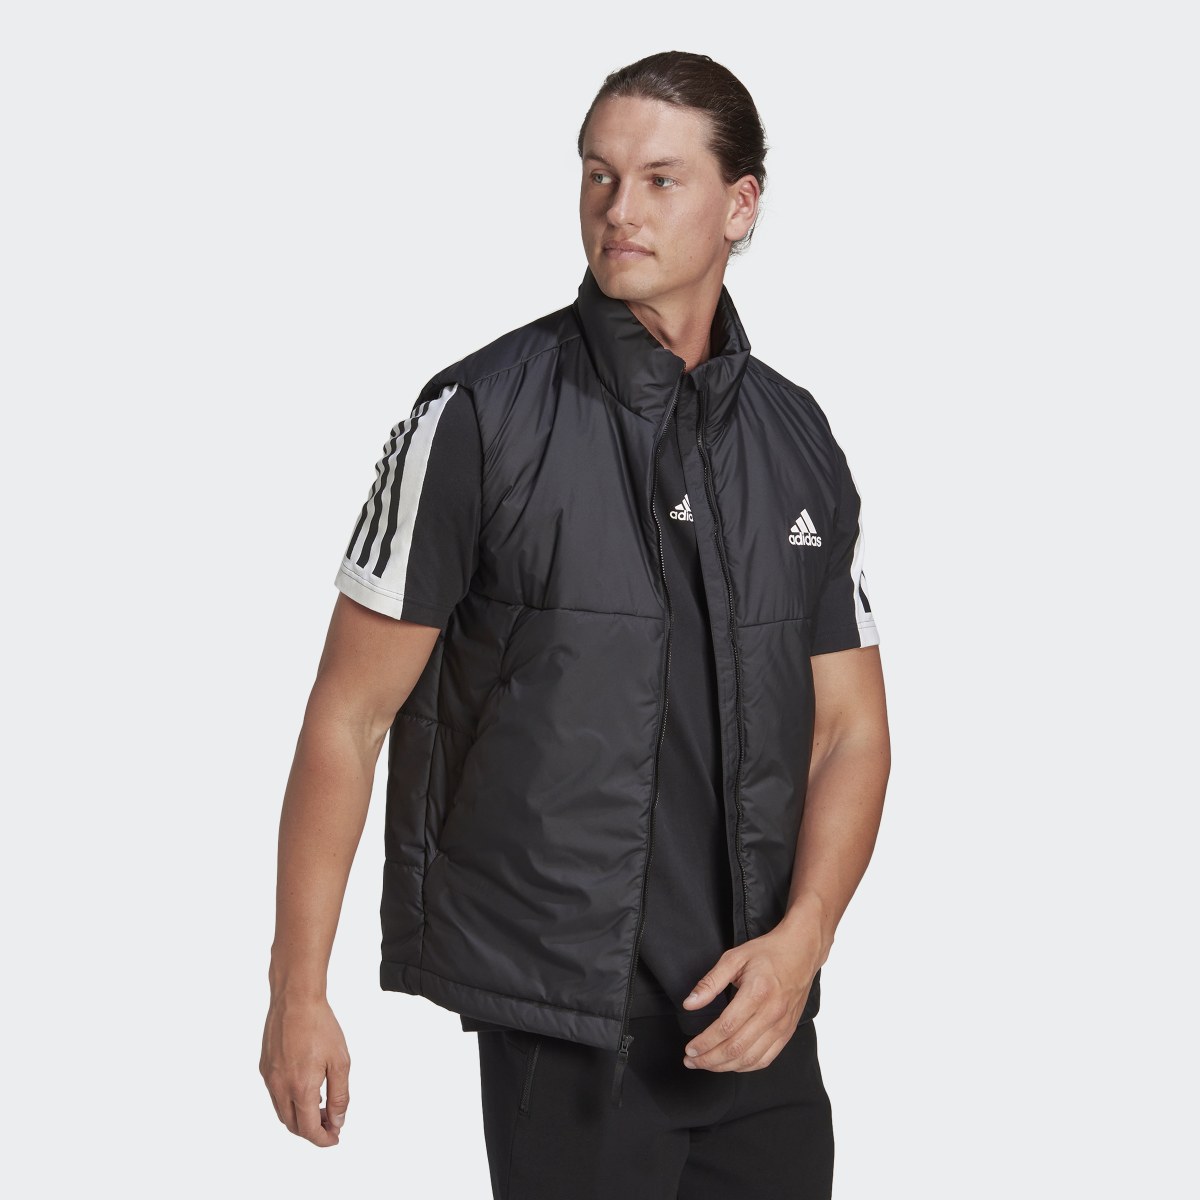 Adidas 3-Stripes Insulated Vest. 4